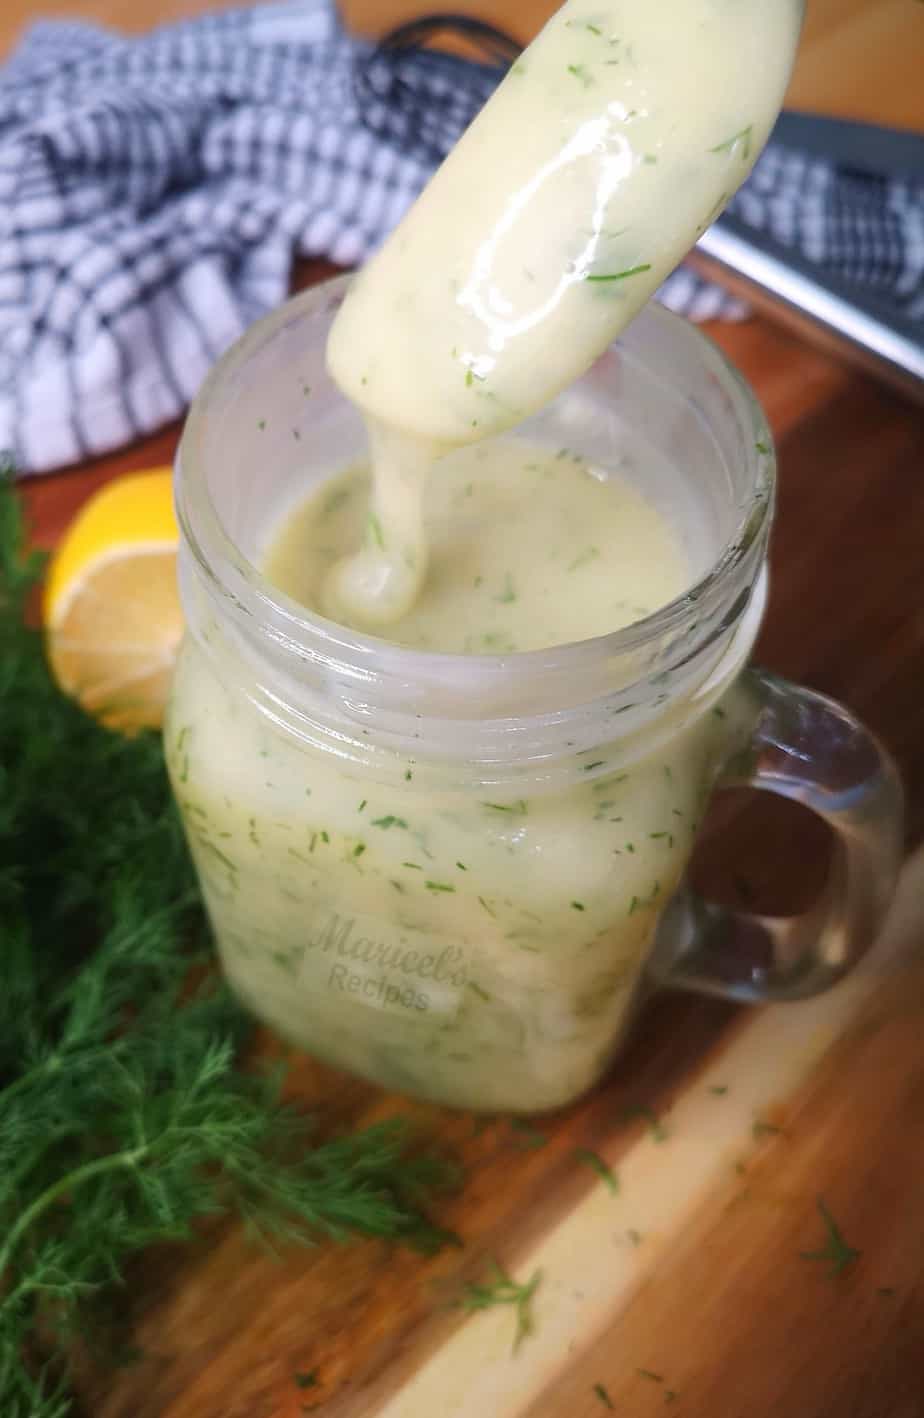 Homemade Honey Dill Sauce - Maricels Recipes Home Cooking